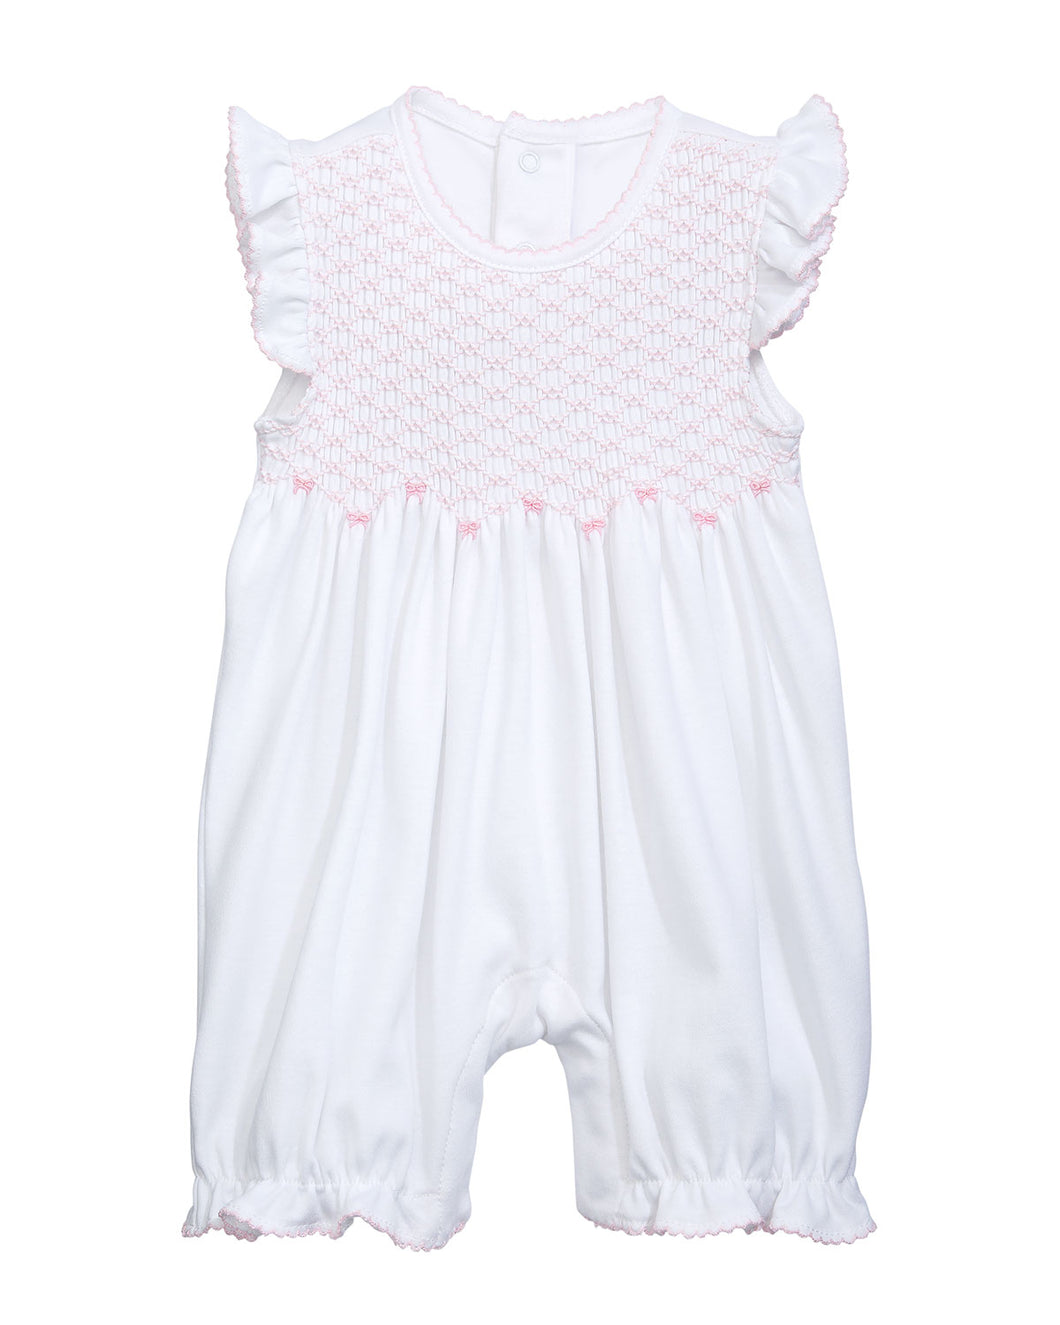 CLB Summer Bows Playsuit